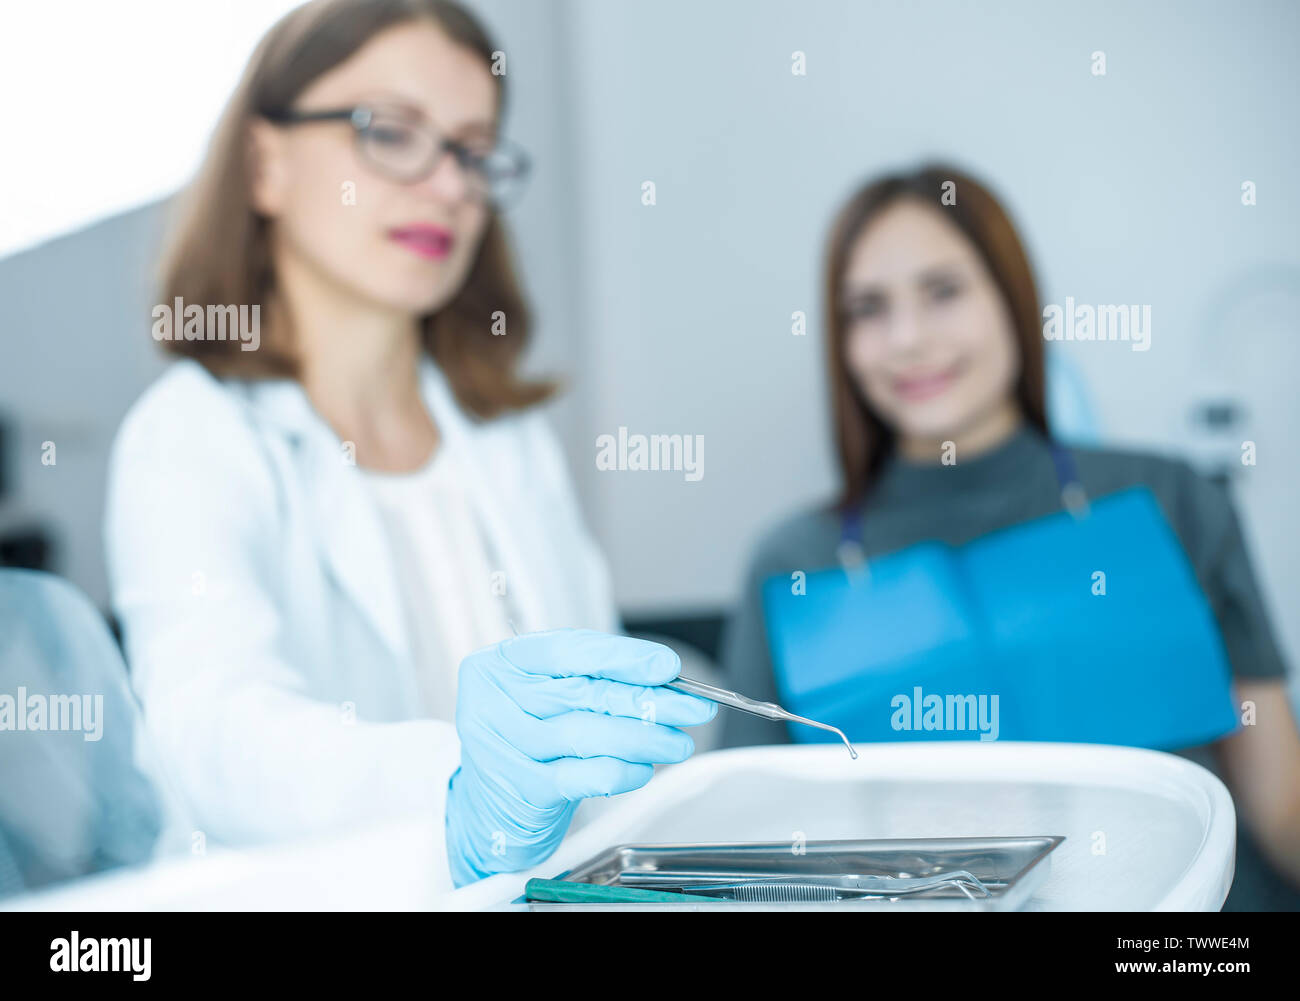 Woman doctor dentist takes a medical instrument. Stock Photo